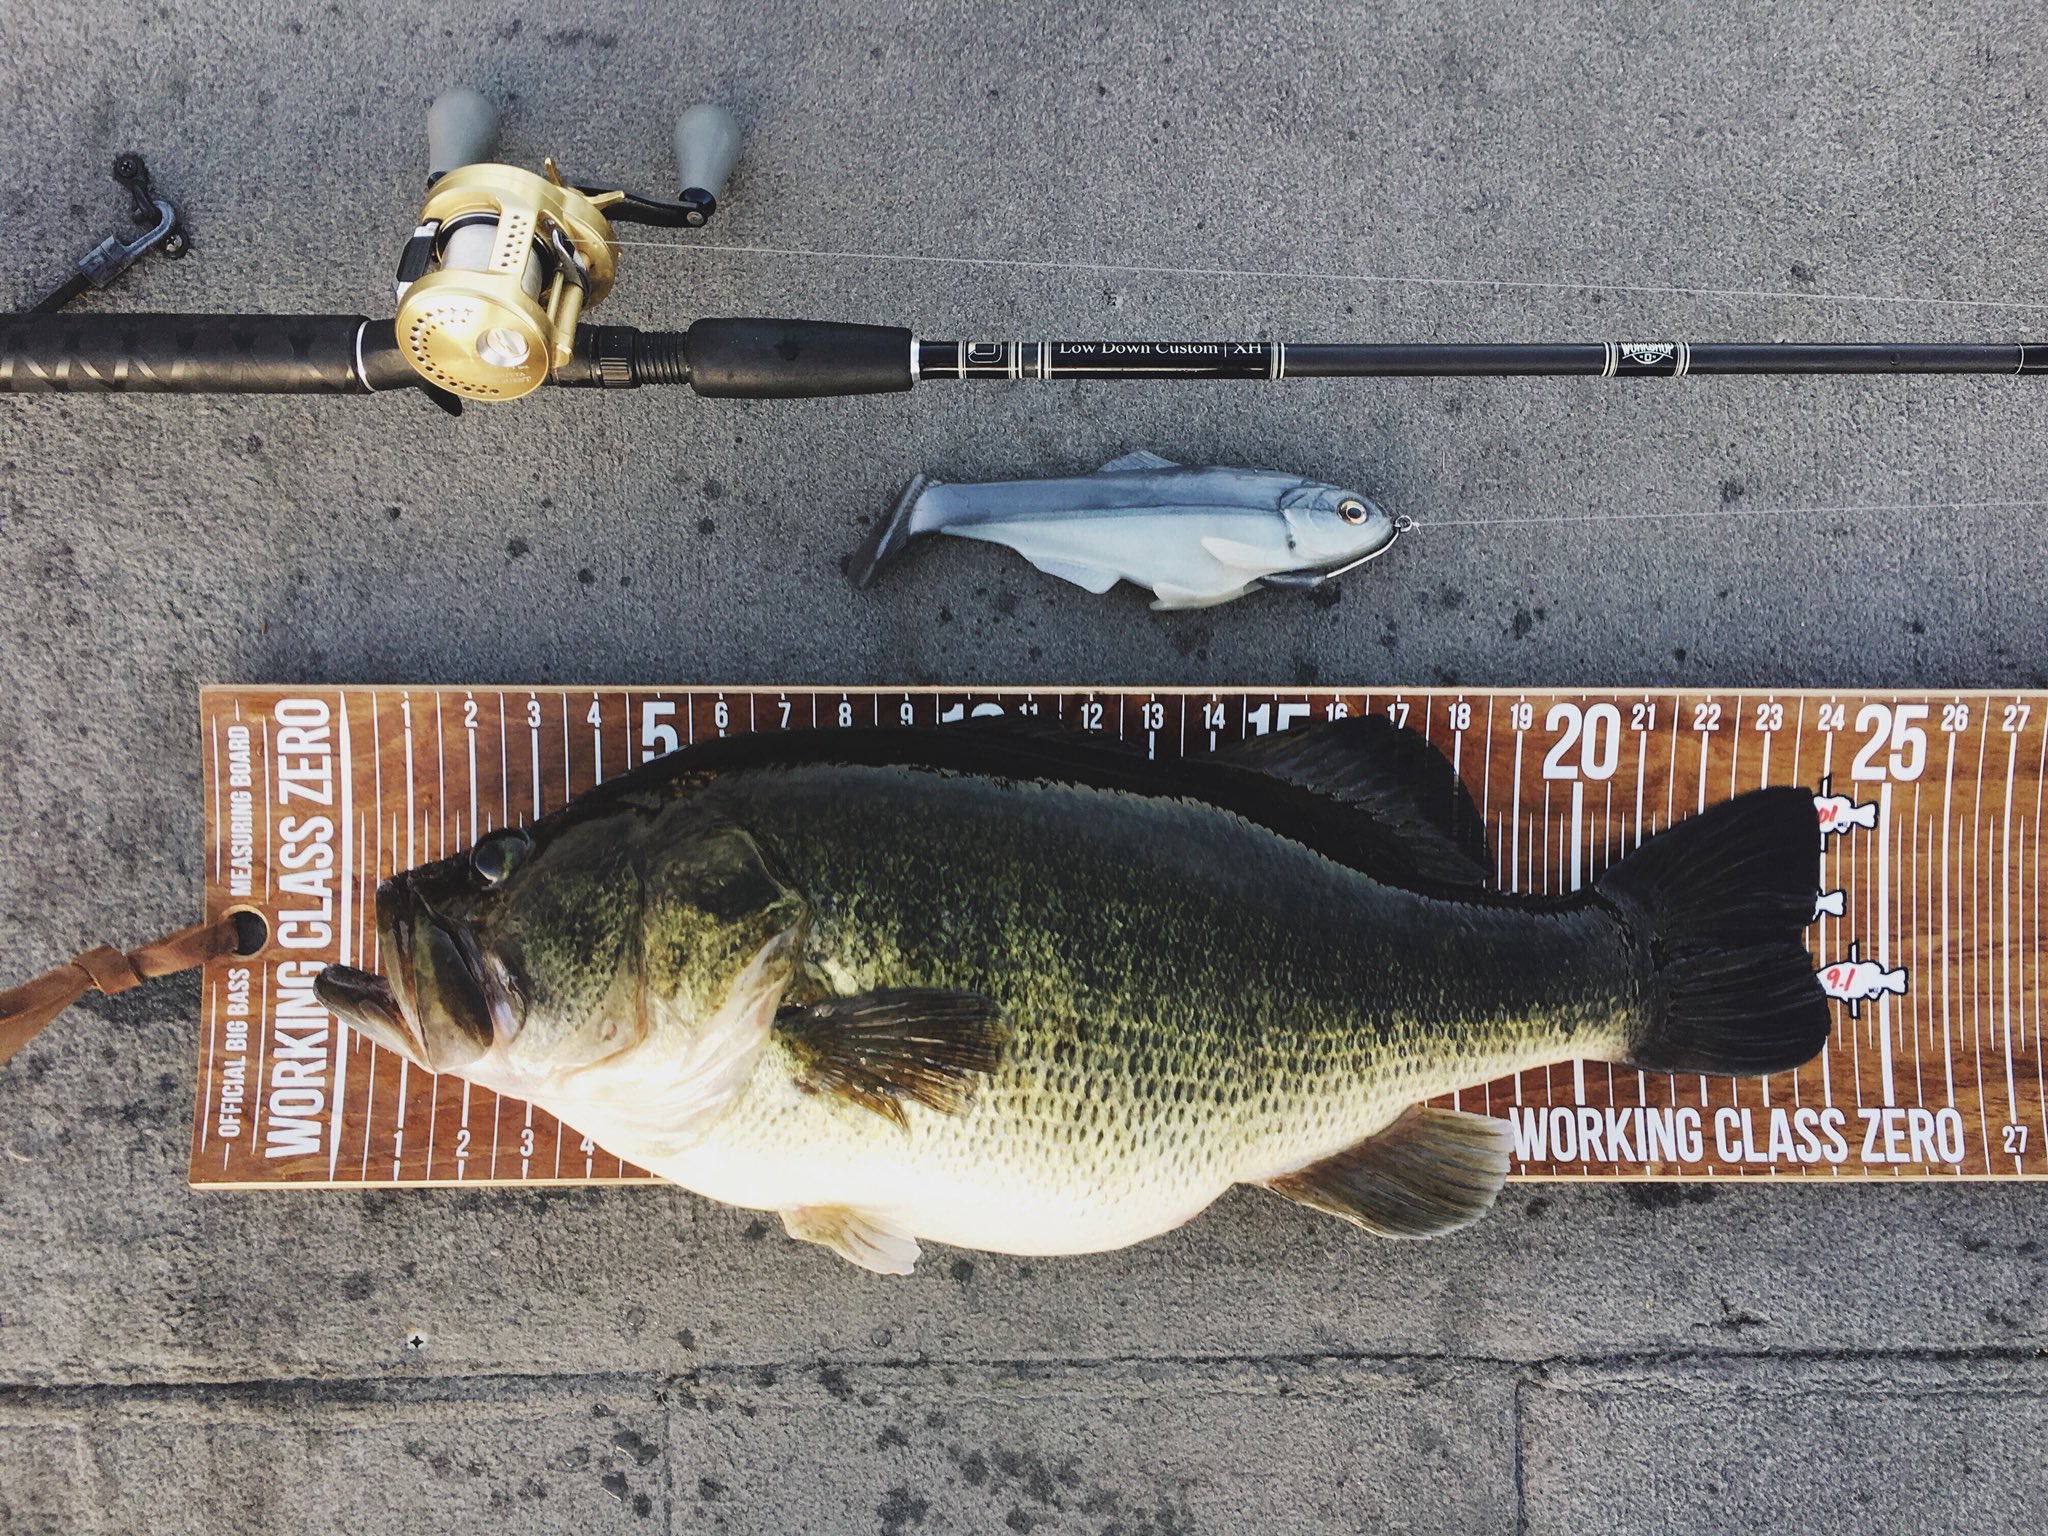 Low Down Customs on X: Last cast. First bass. (@gilbertmike_WCZ